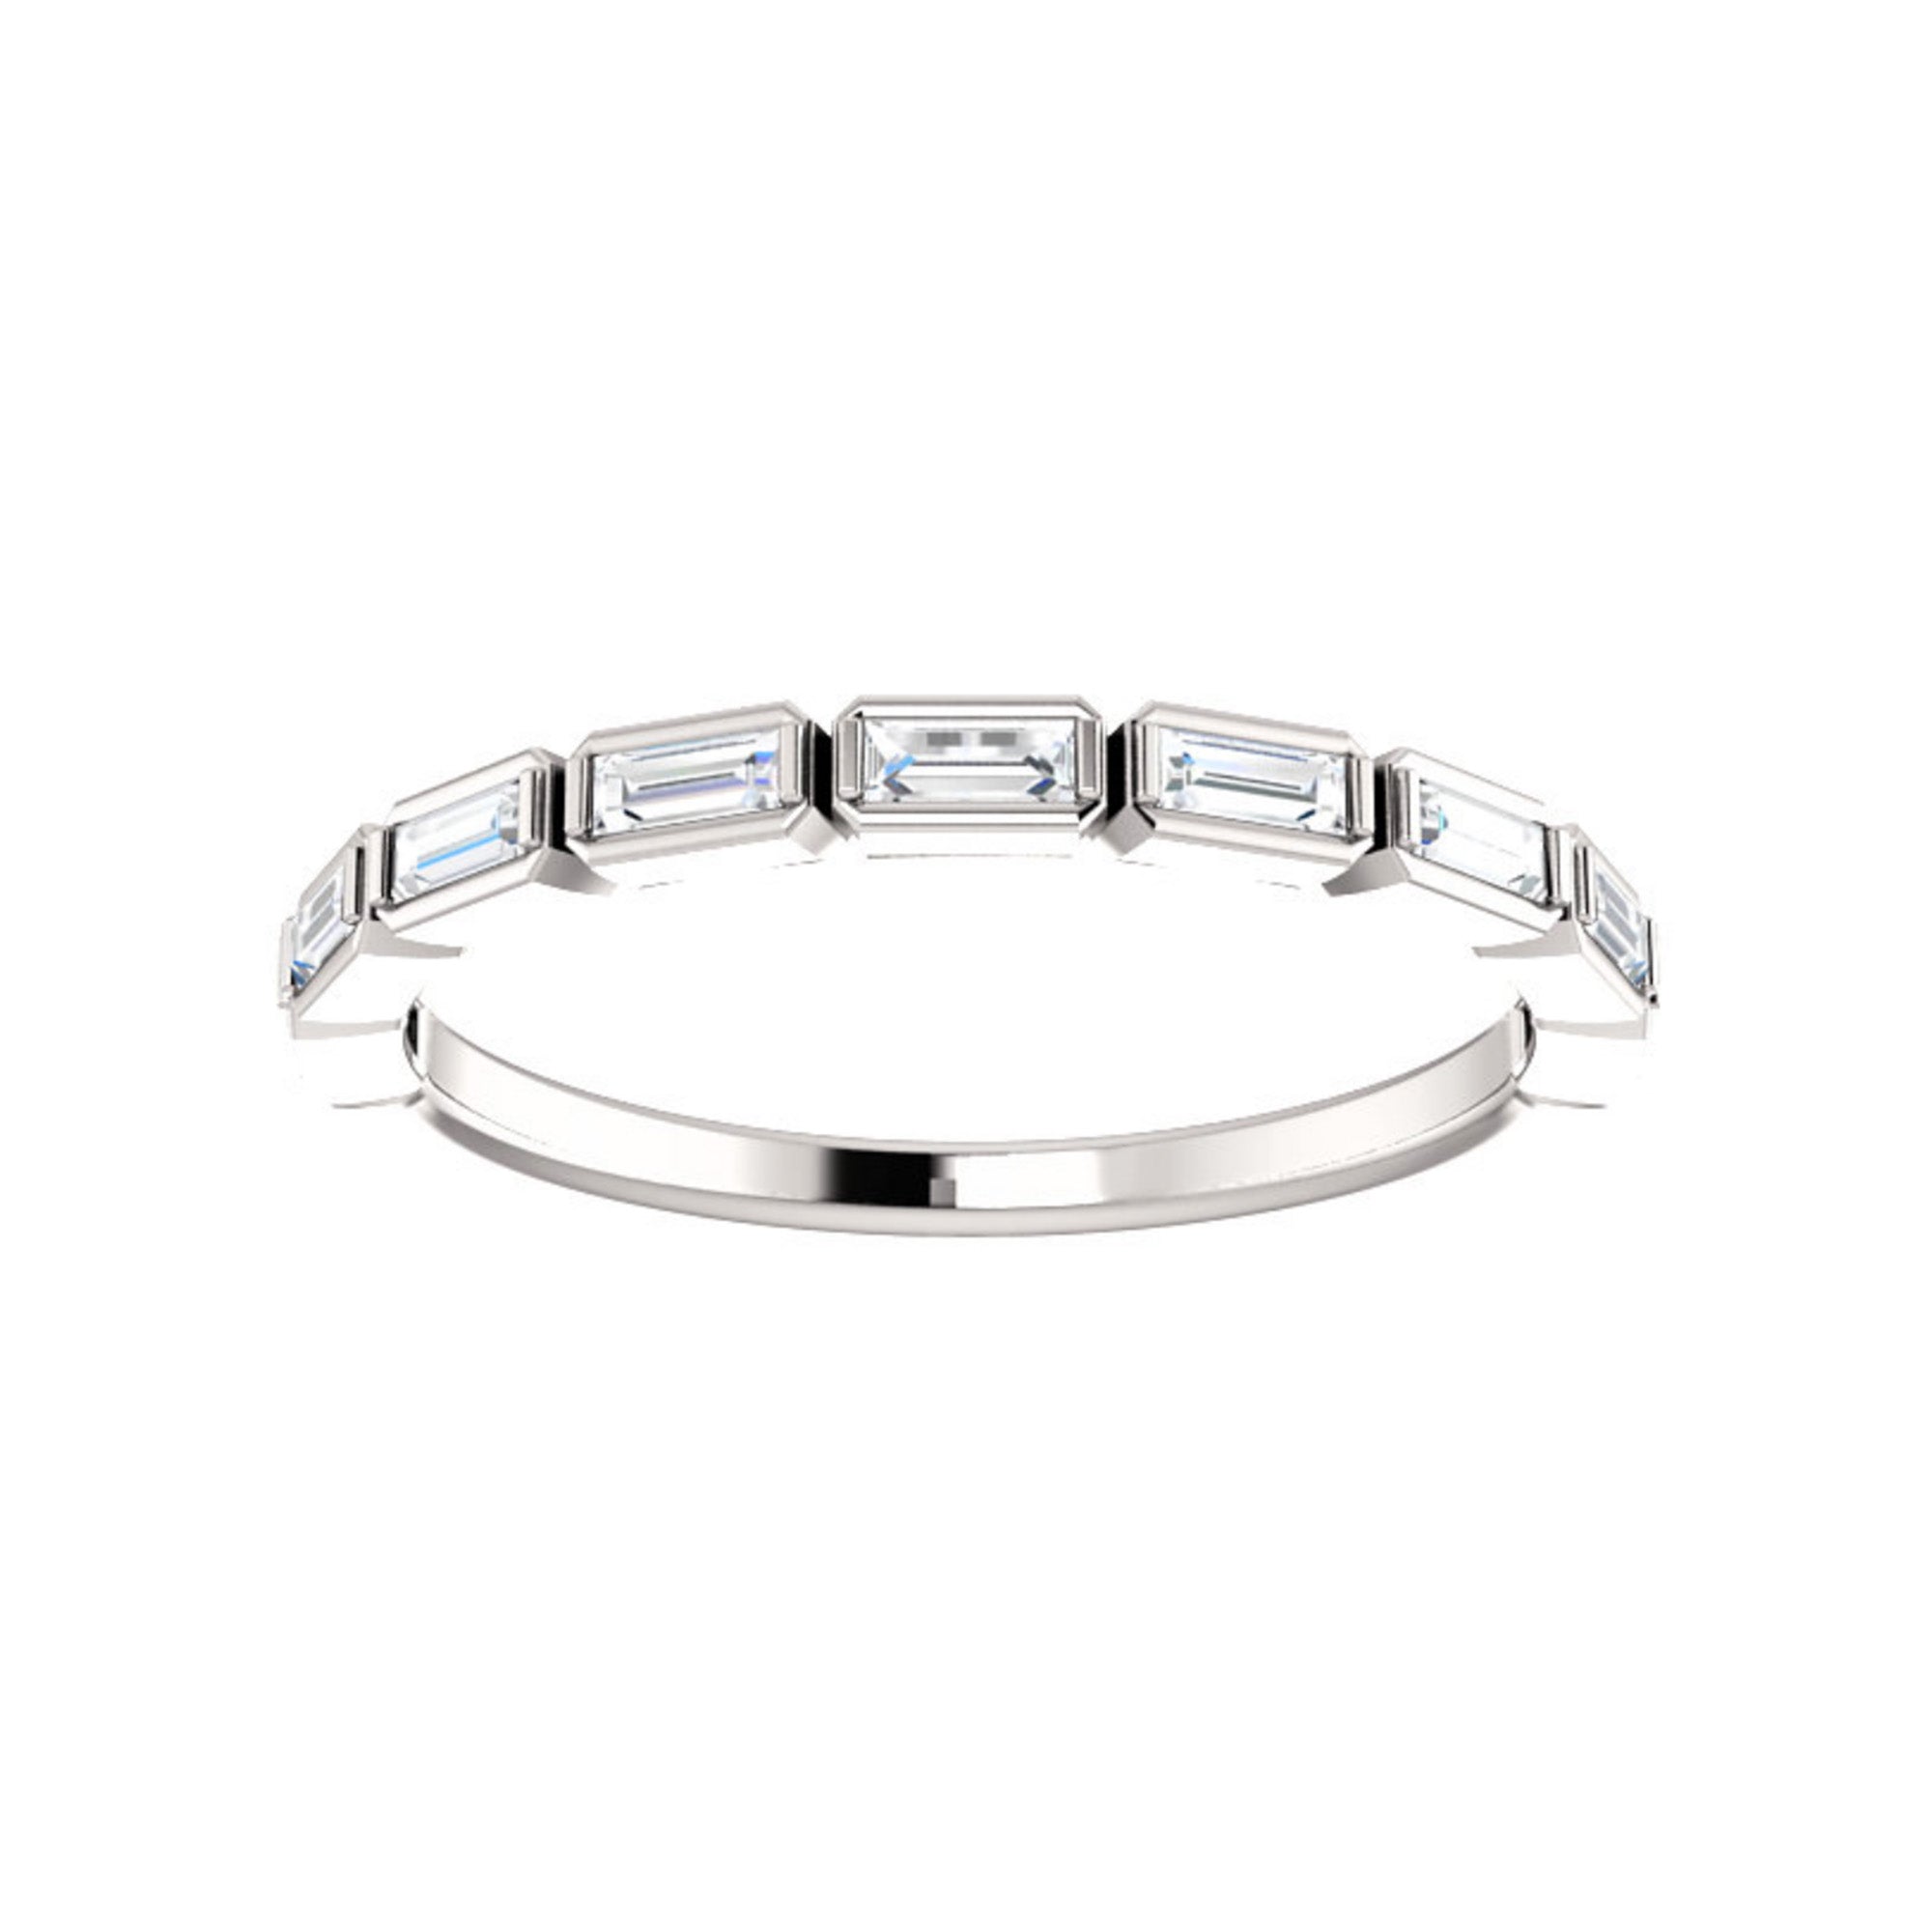 Bezel-Set Baguette Diamond Stack Band in White, Yellow or Rose Gold - Talisman Collection Fine Jewelers